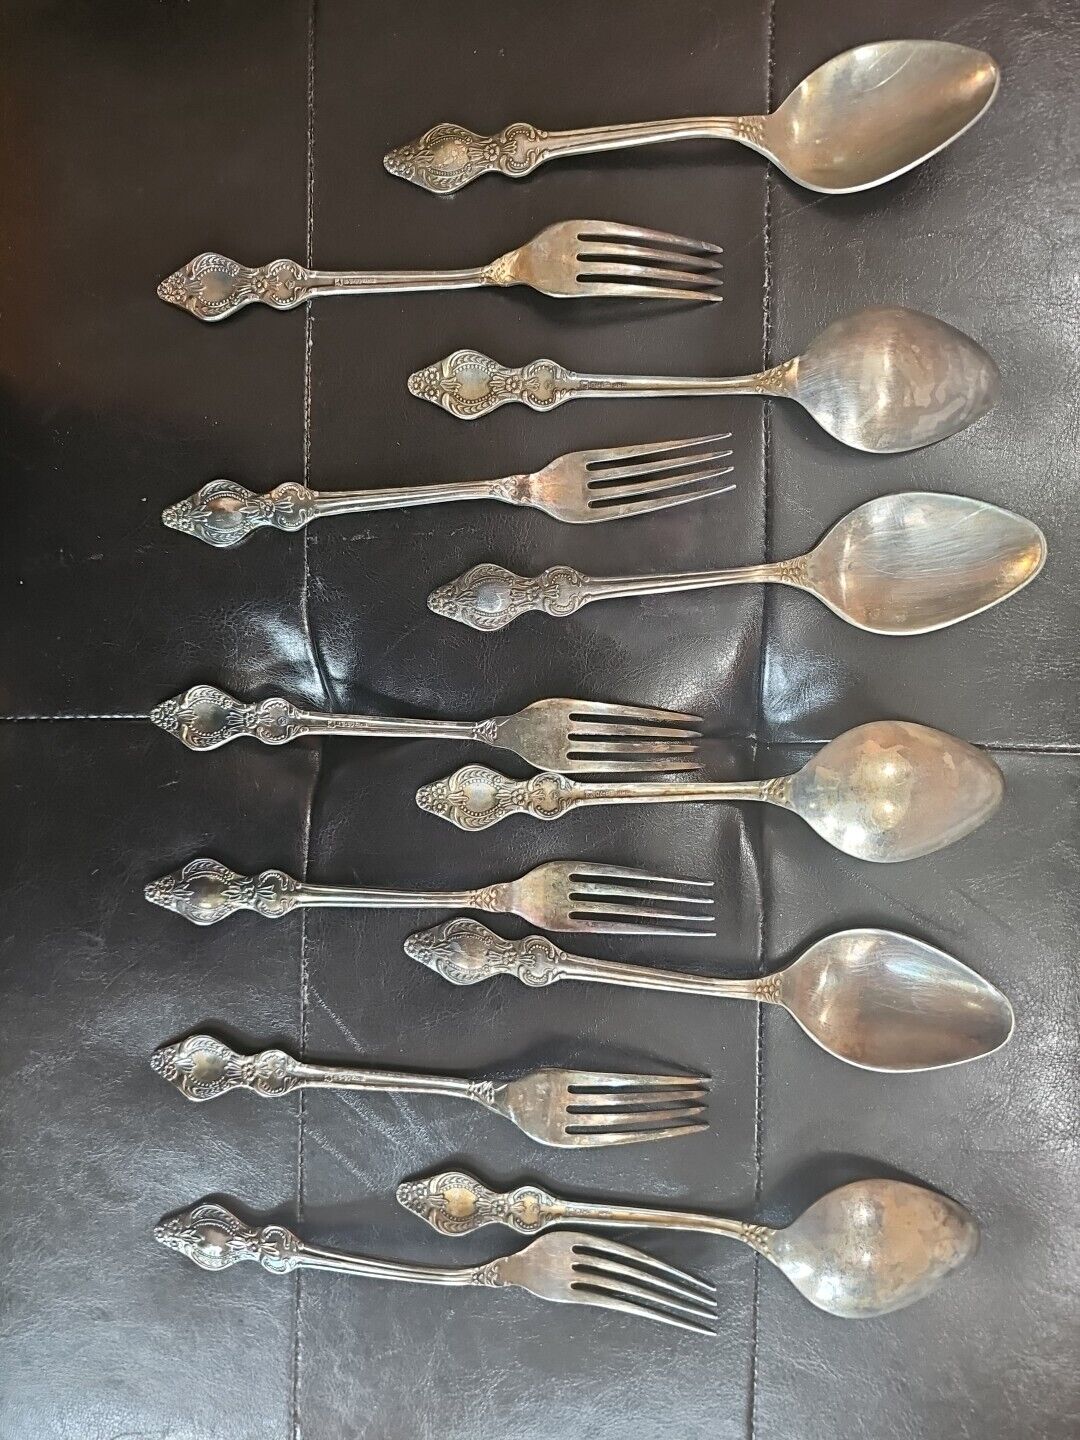 Set of melchiour Soviet era spoons and forks